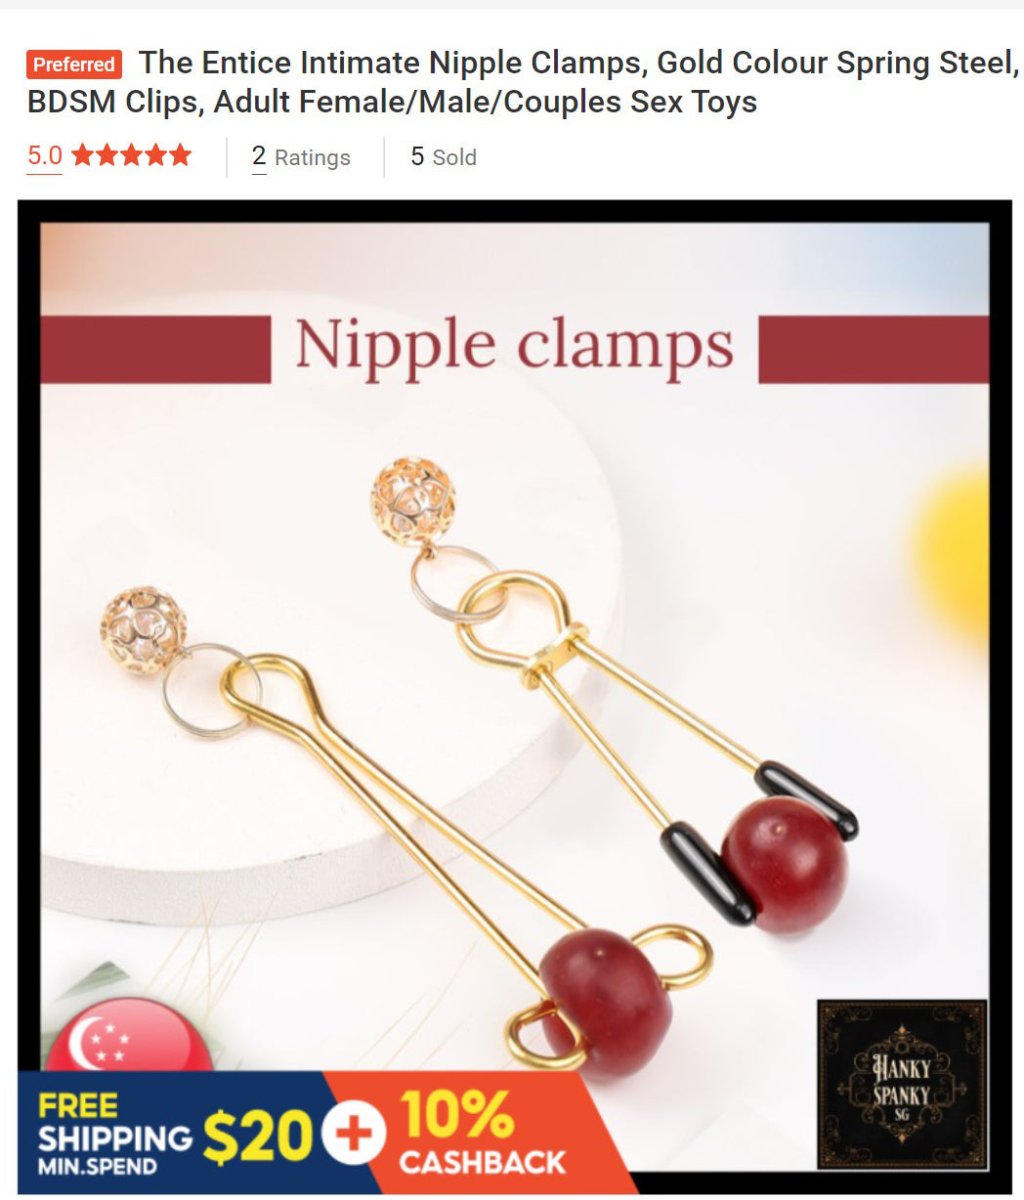 Entice - Intimate Nipple Clamps - FRISKY BUSINESS SG